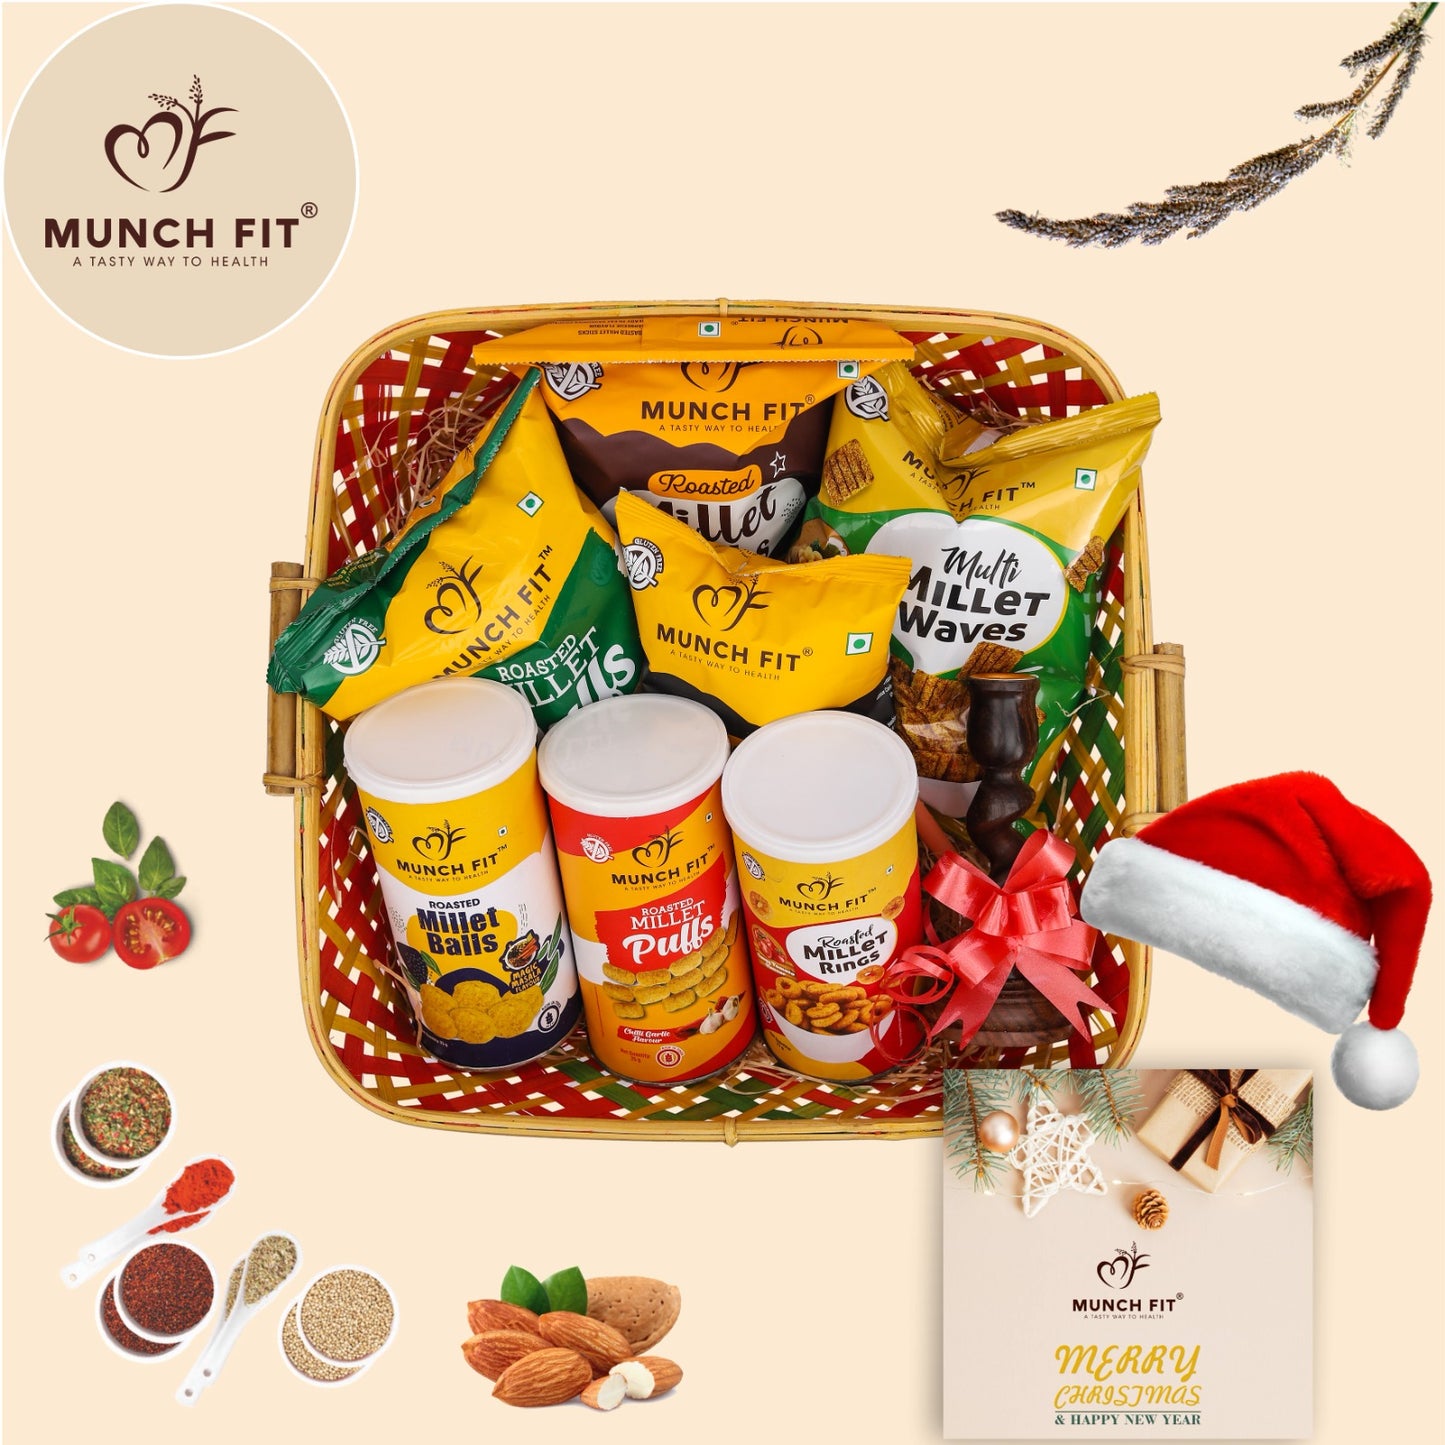 Munchfit Healthy Christmas & New Year Gift Hamper with Christmas Cap & Card | Variety of Sweet & Salted, Tasty, & Crunchy Healthy Snacks & Puffs with Candle Stand | New Year Corporate Gift for Employees & Clients | Pack of 7 Varieties of Snacks